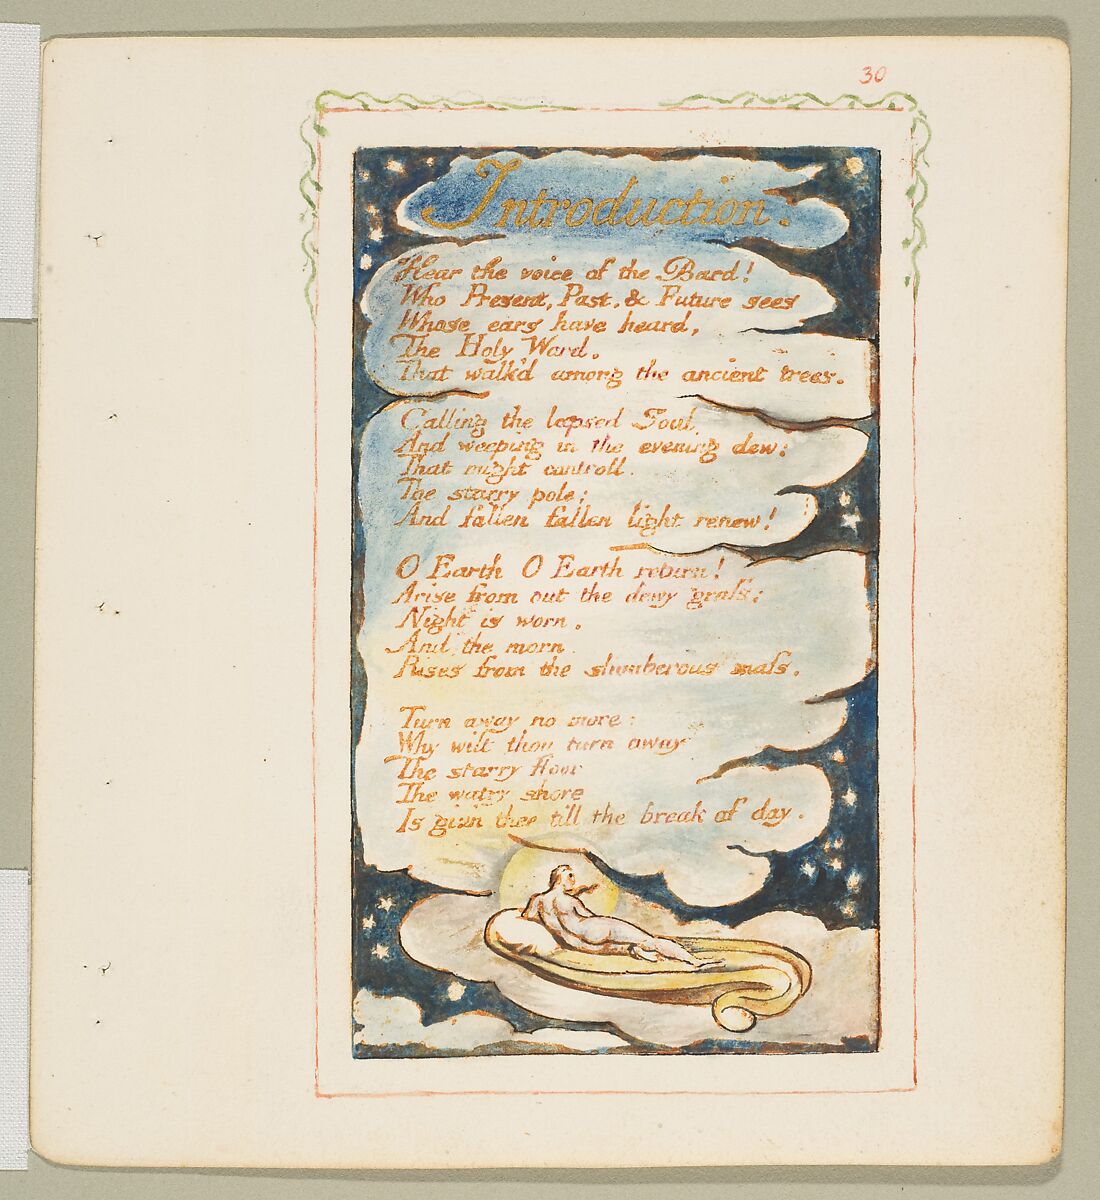 Songs of Experience: Introduction, William Blake, Relief etching printed in orange-brown ink and hand-colored with watercolor and shell gold